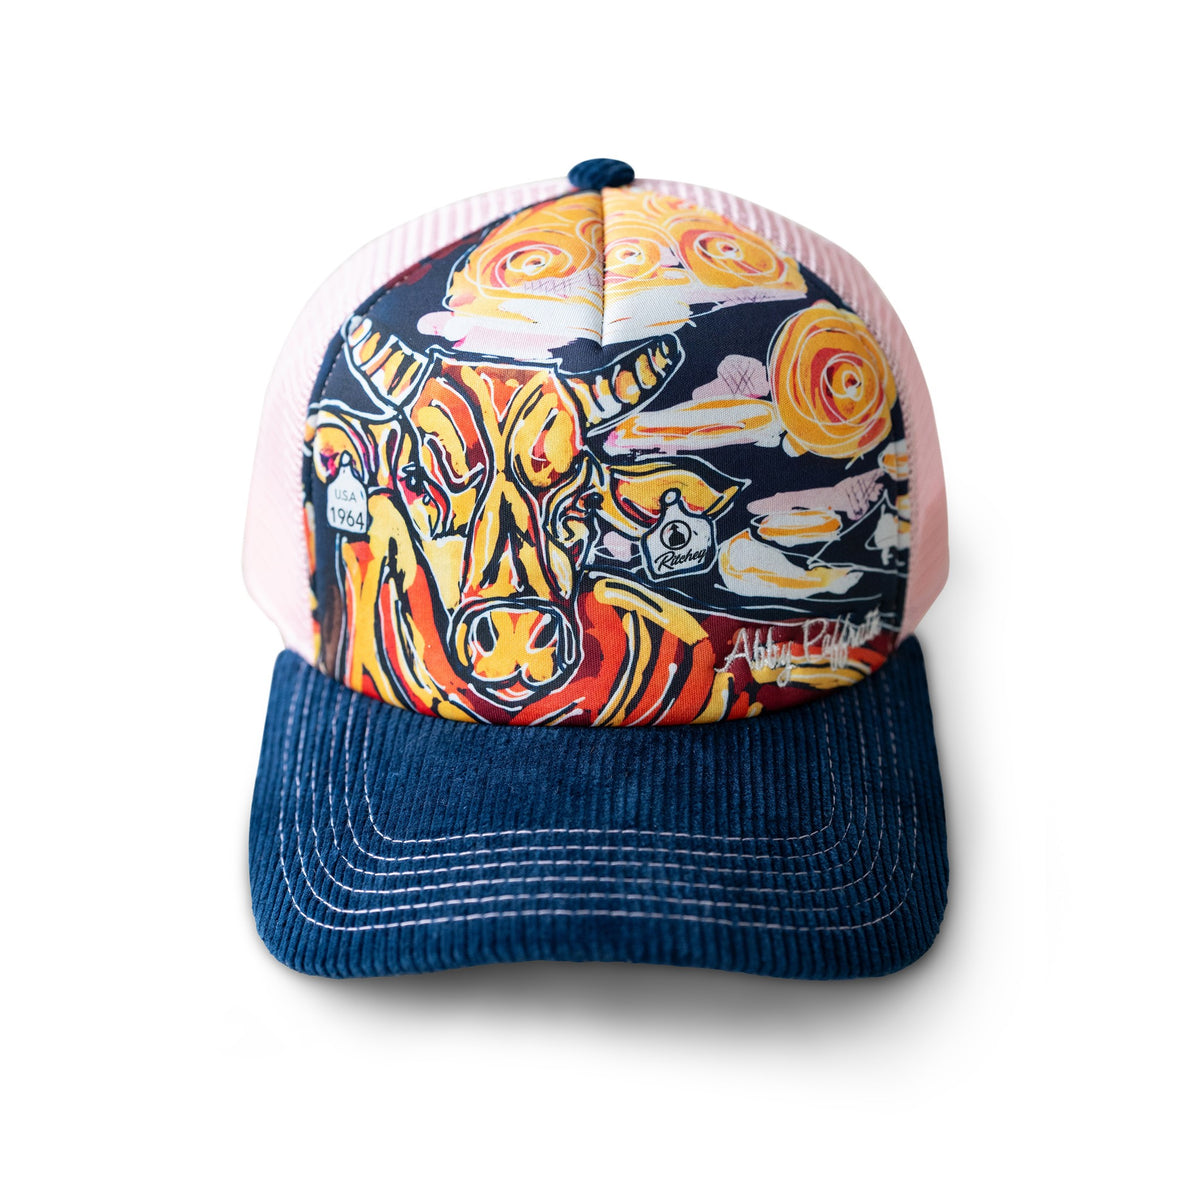 Trucker Hats for Women by Abby Paffrath